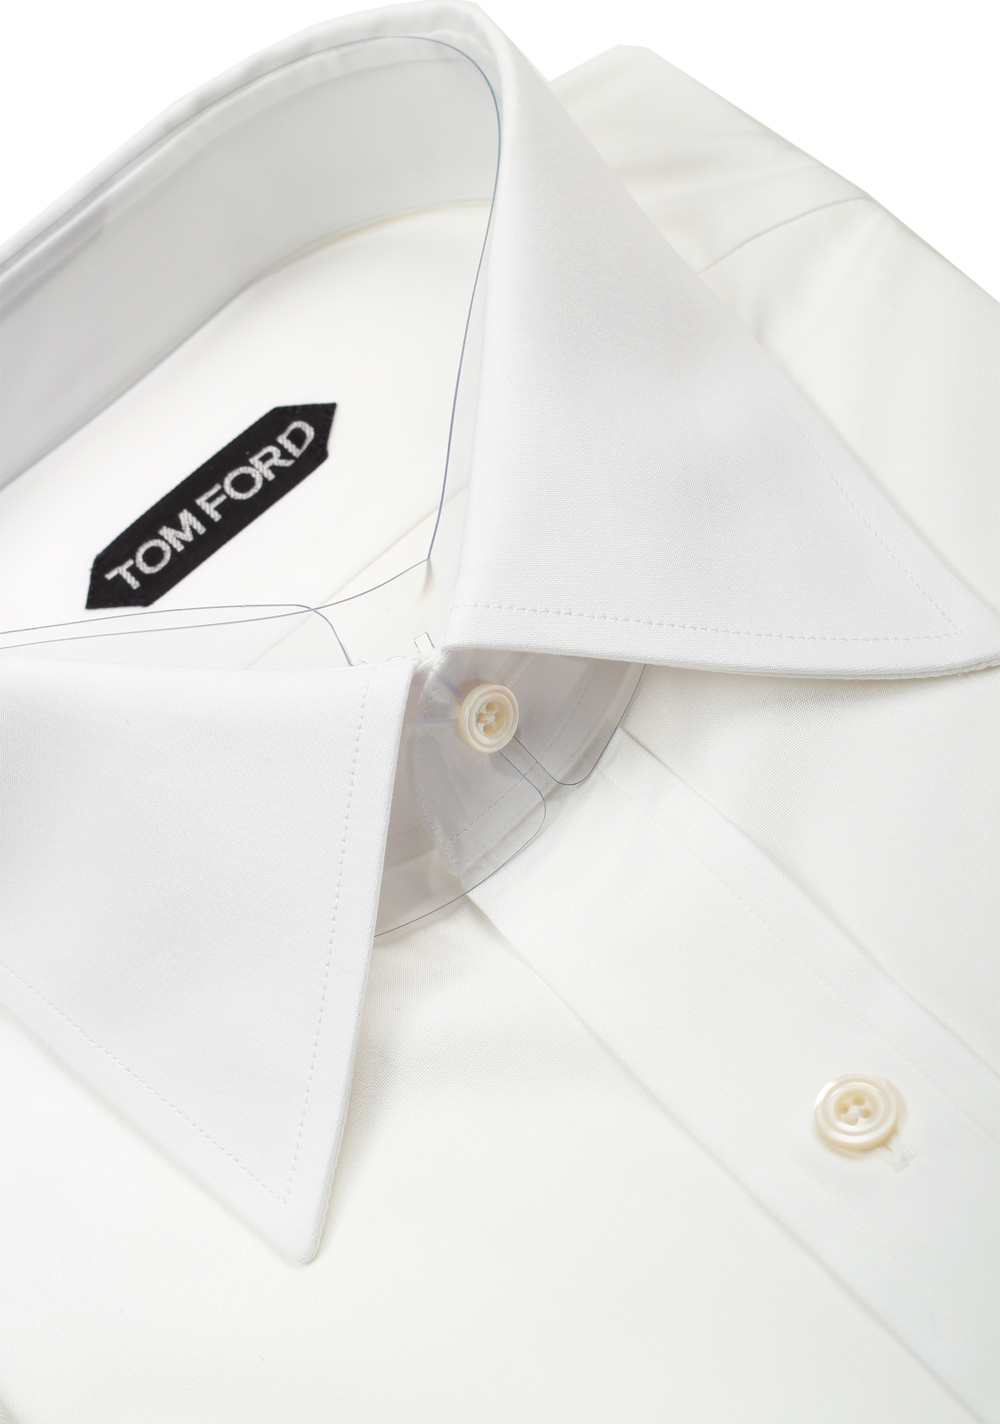 TOM FORD Solid White Signature Shirt Slim Fit | Costume Limité